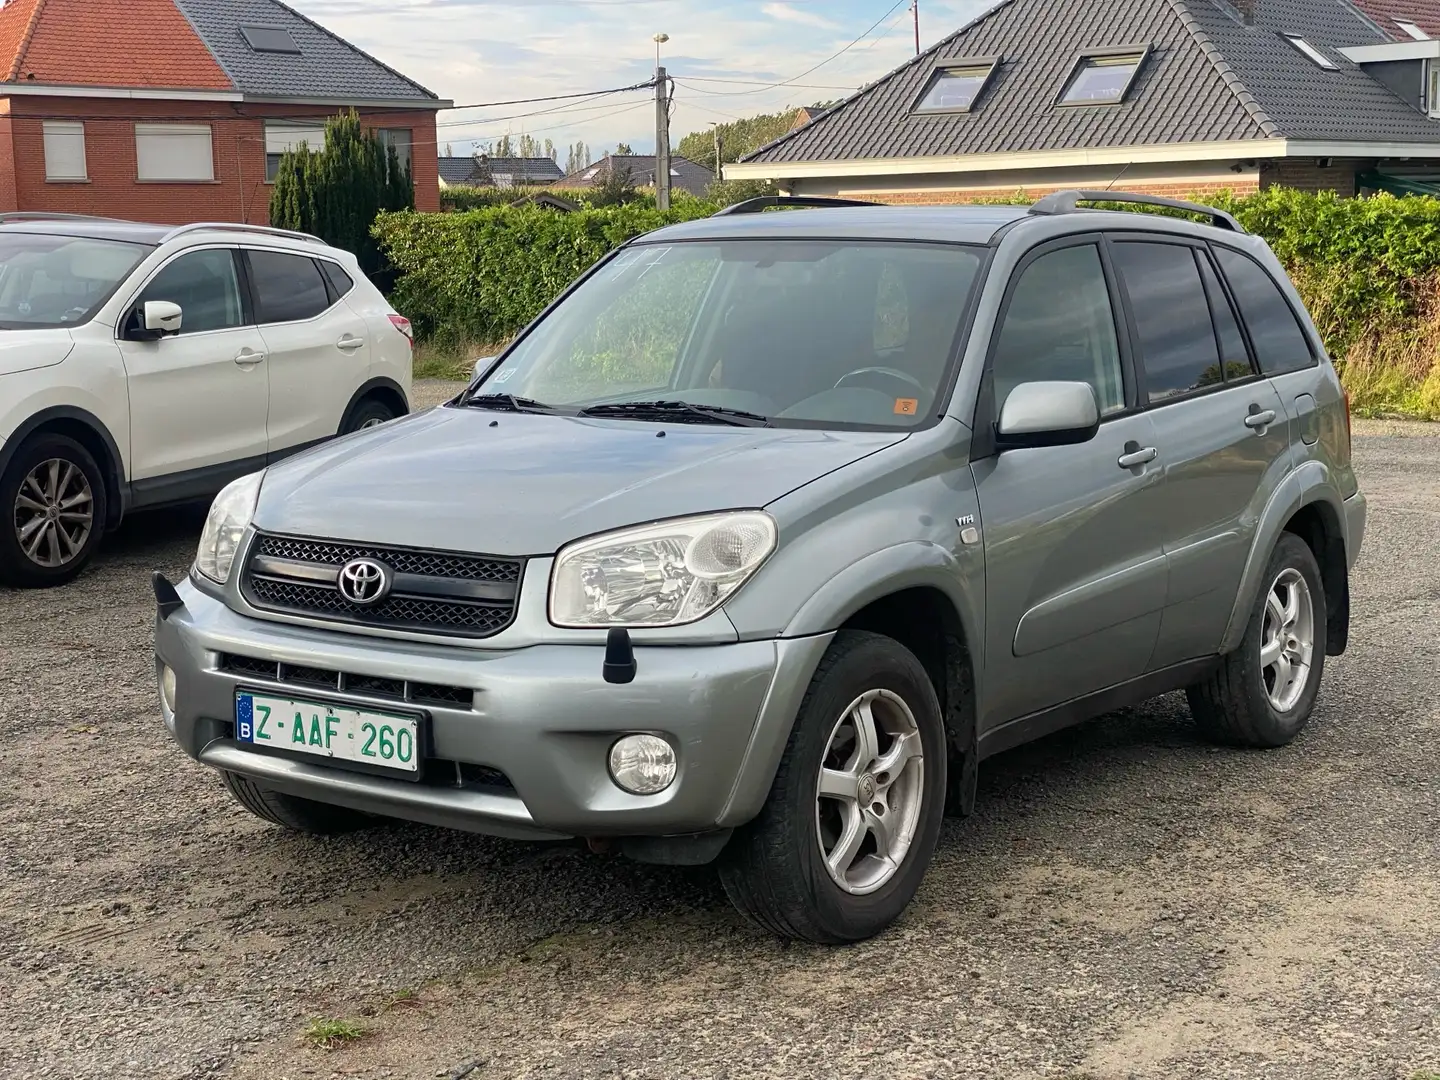 Toyota RAV 4 SUV4x4  Essence Climatise only to Africa Gris - 1